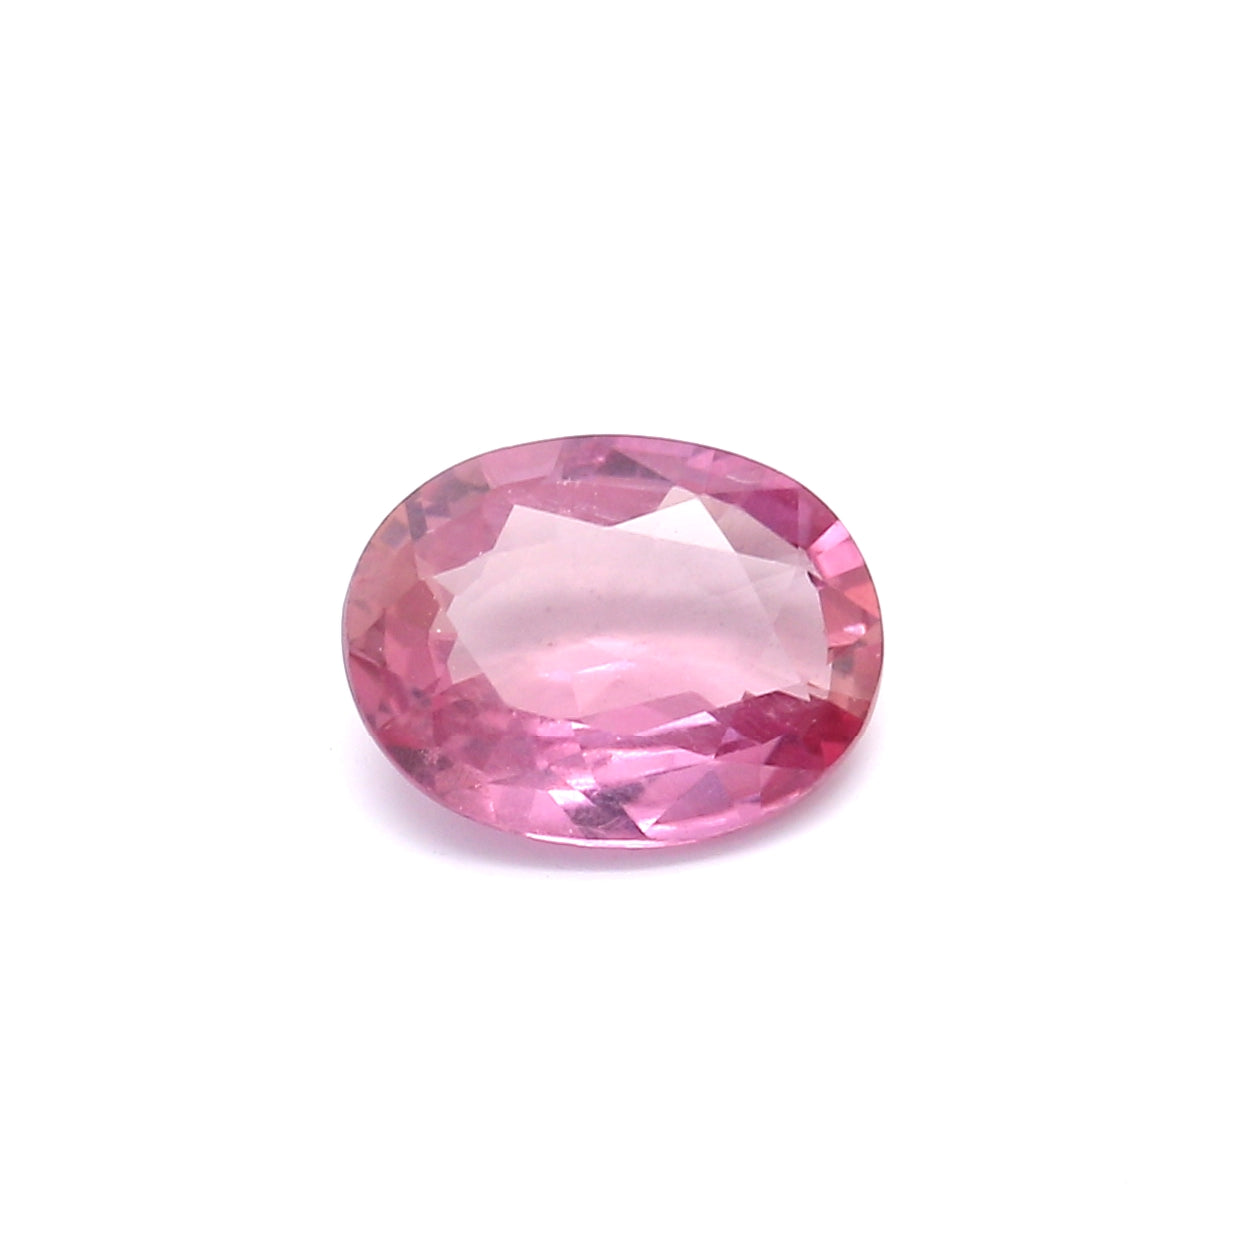 2.36ct Orangy Pink, Oval Sapphire, Heated, Mozambique - 9.58 x 7.41 x 3.56mm